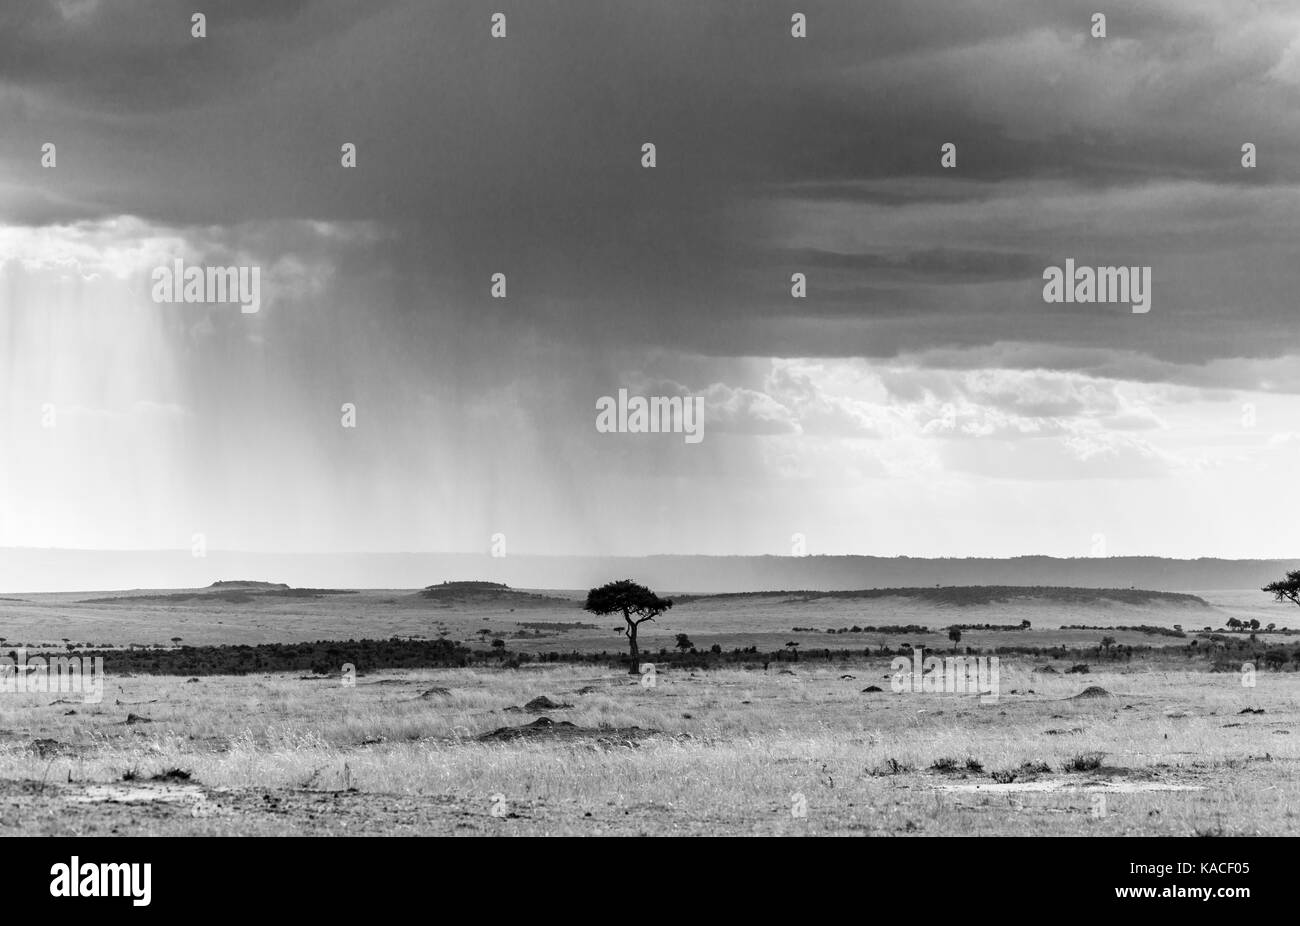 Black & white view of African landscape in bad weather: raining in the Masai Mara, Kenya, grey storm clouds precede a downpour of heavy rain Stock Photo